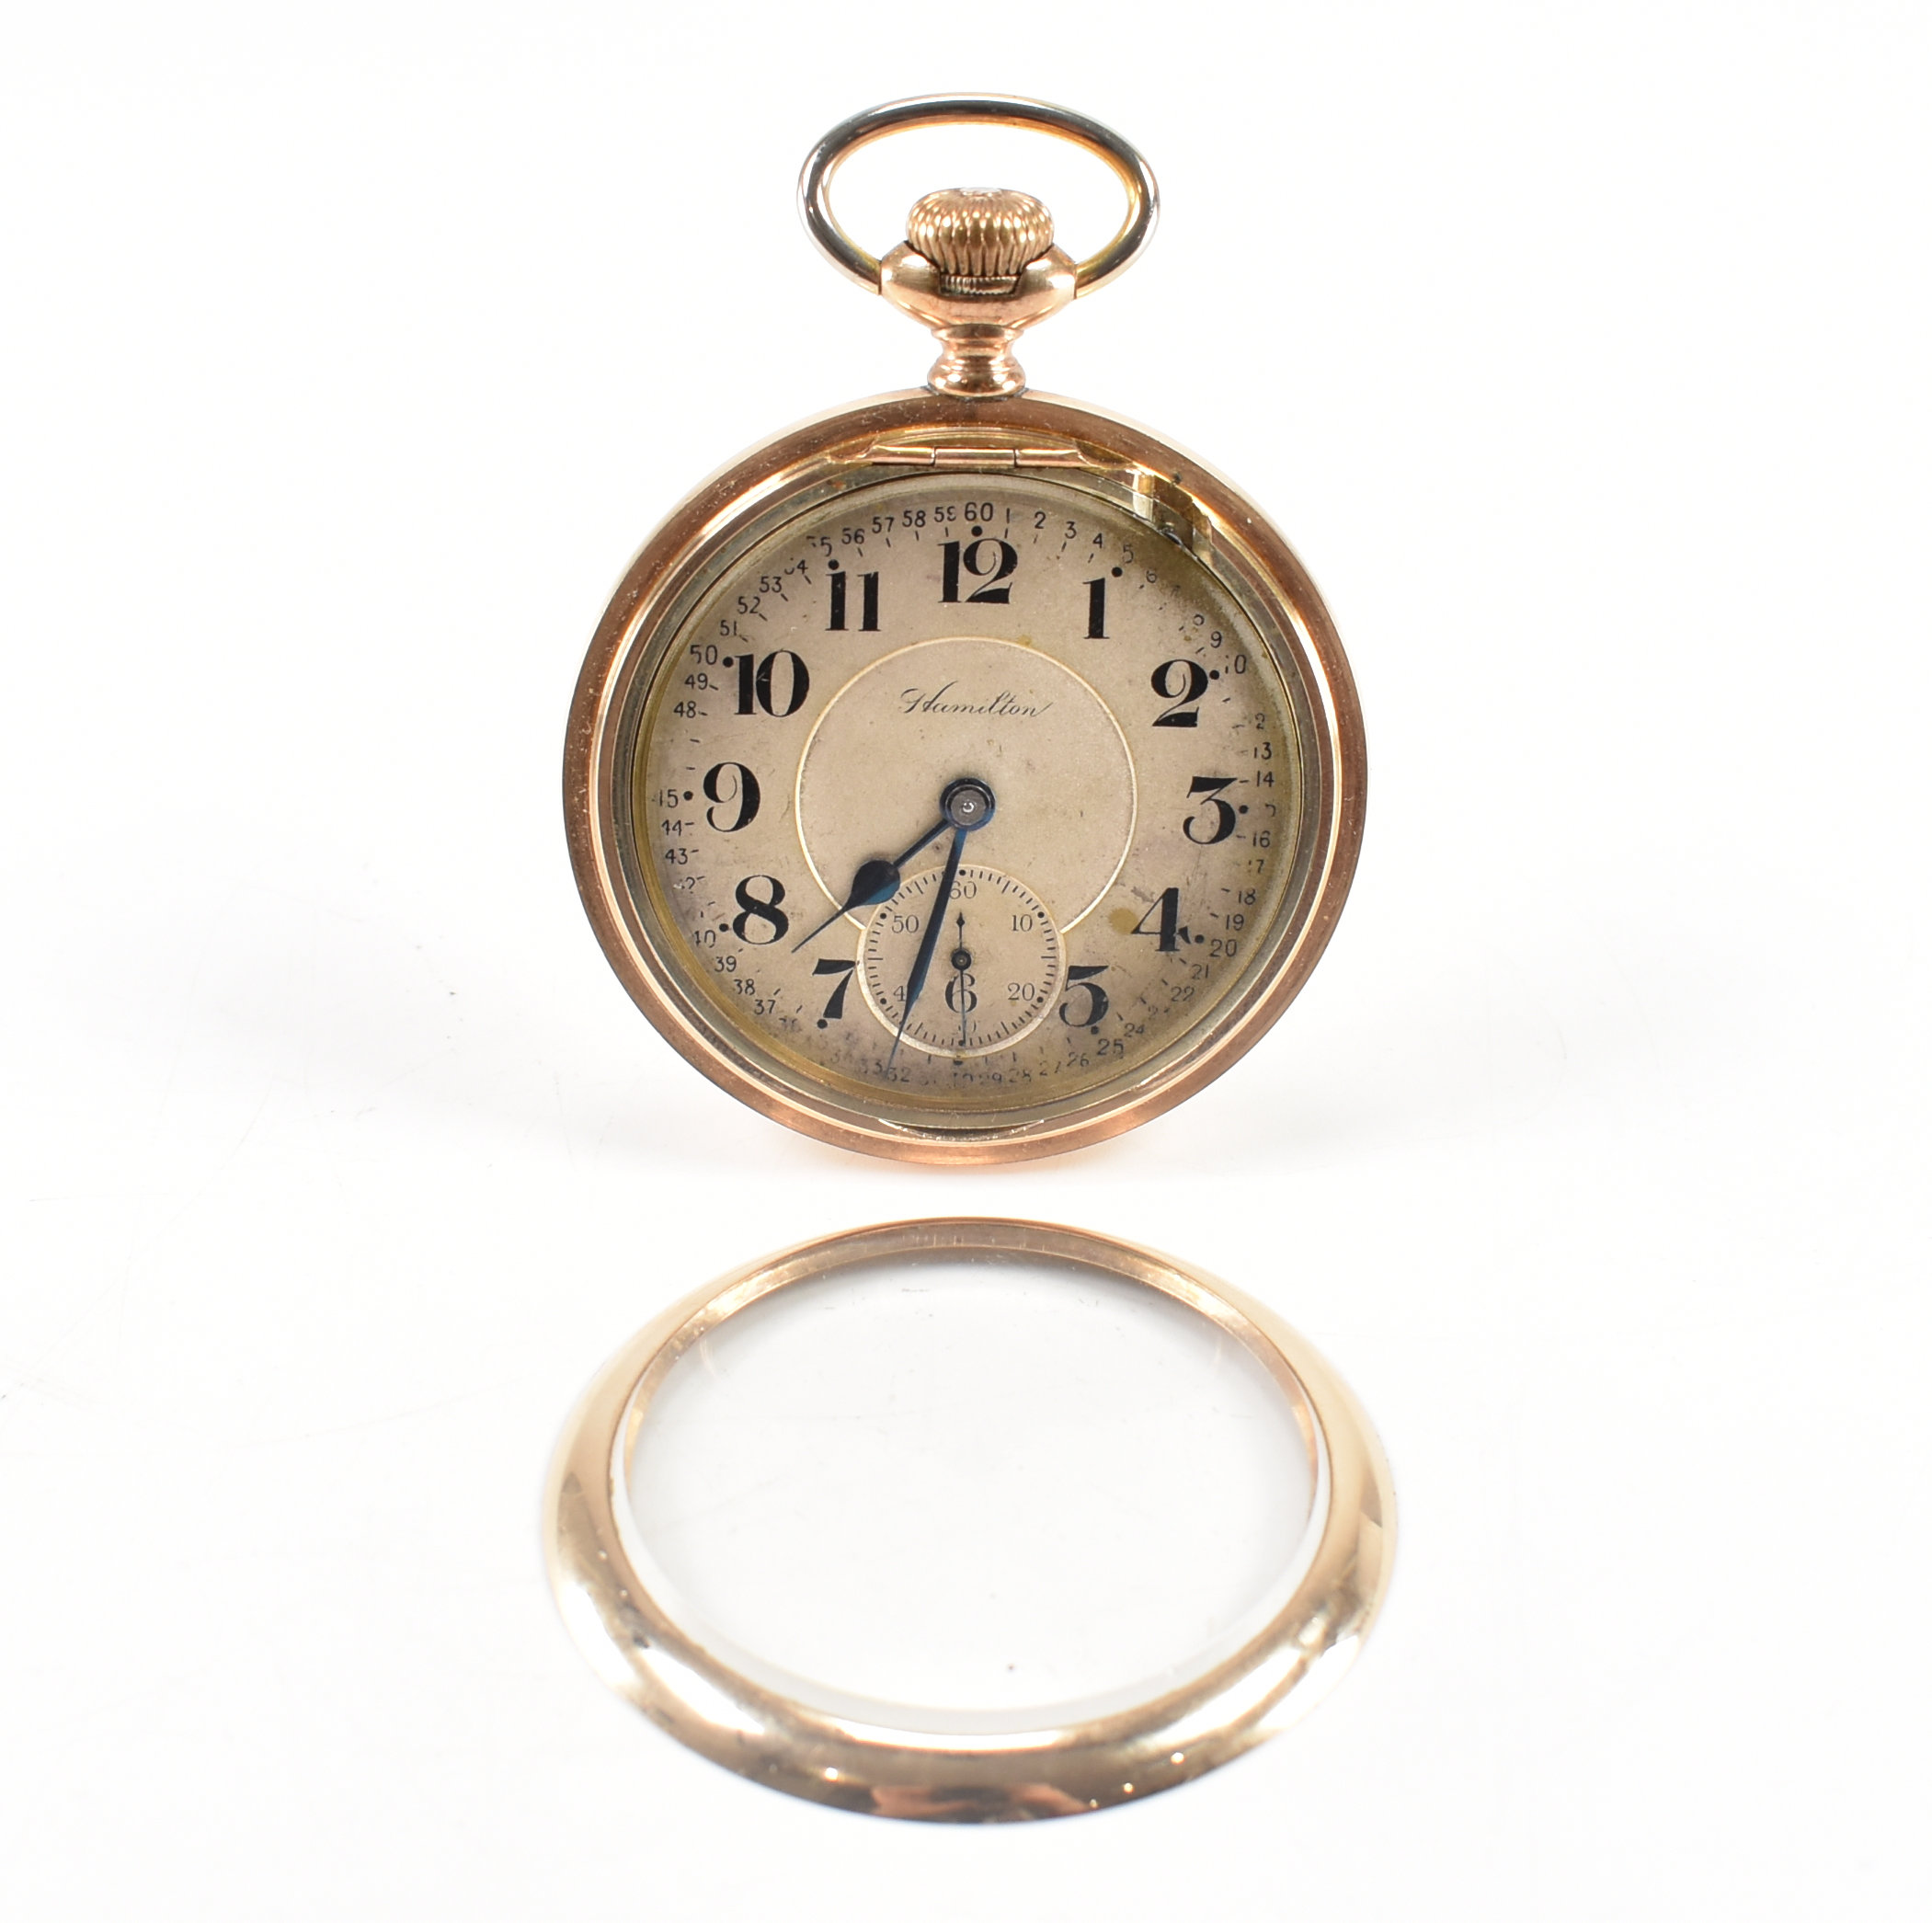 ANTIQUE HAMILTON WATCH COMPANY GOLD PLATED POCKET WATCH - Image 8 of 9